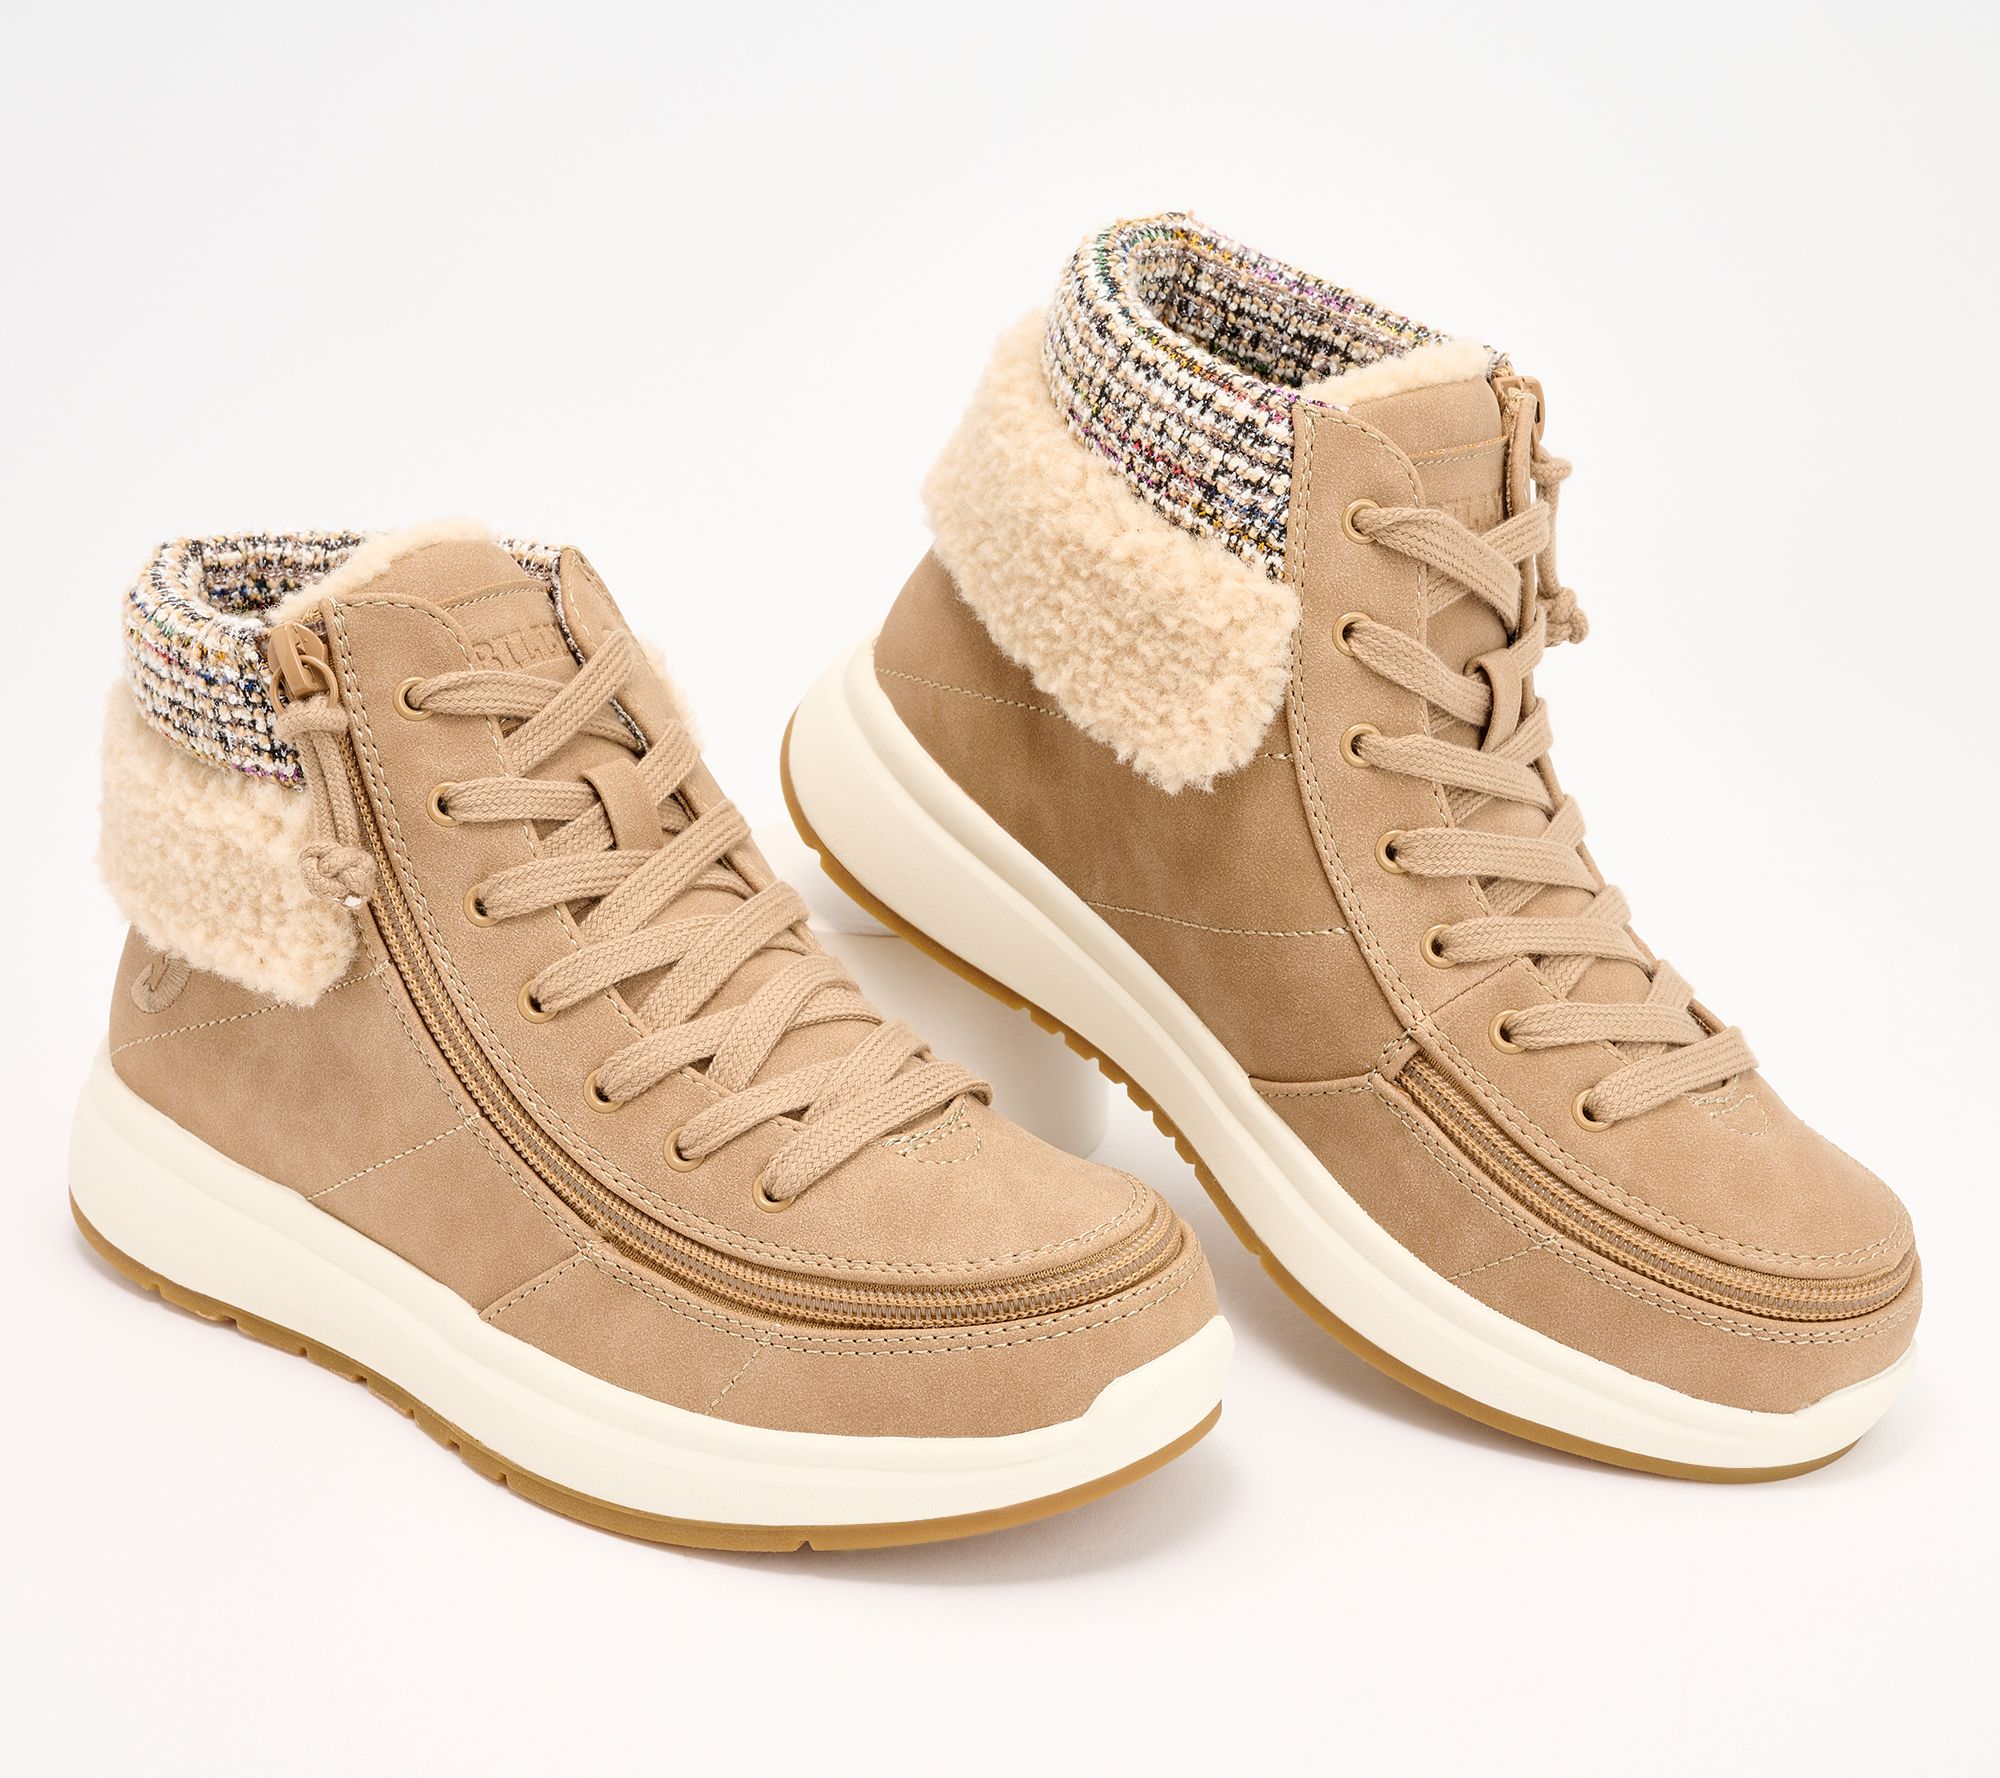 BILLY Footwear Zip-On Lace Mid Top Sneakers - QVC.com